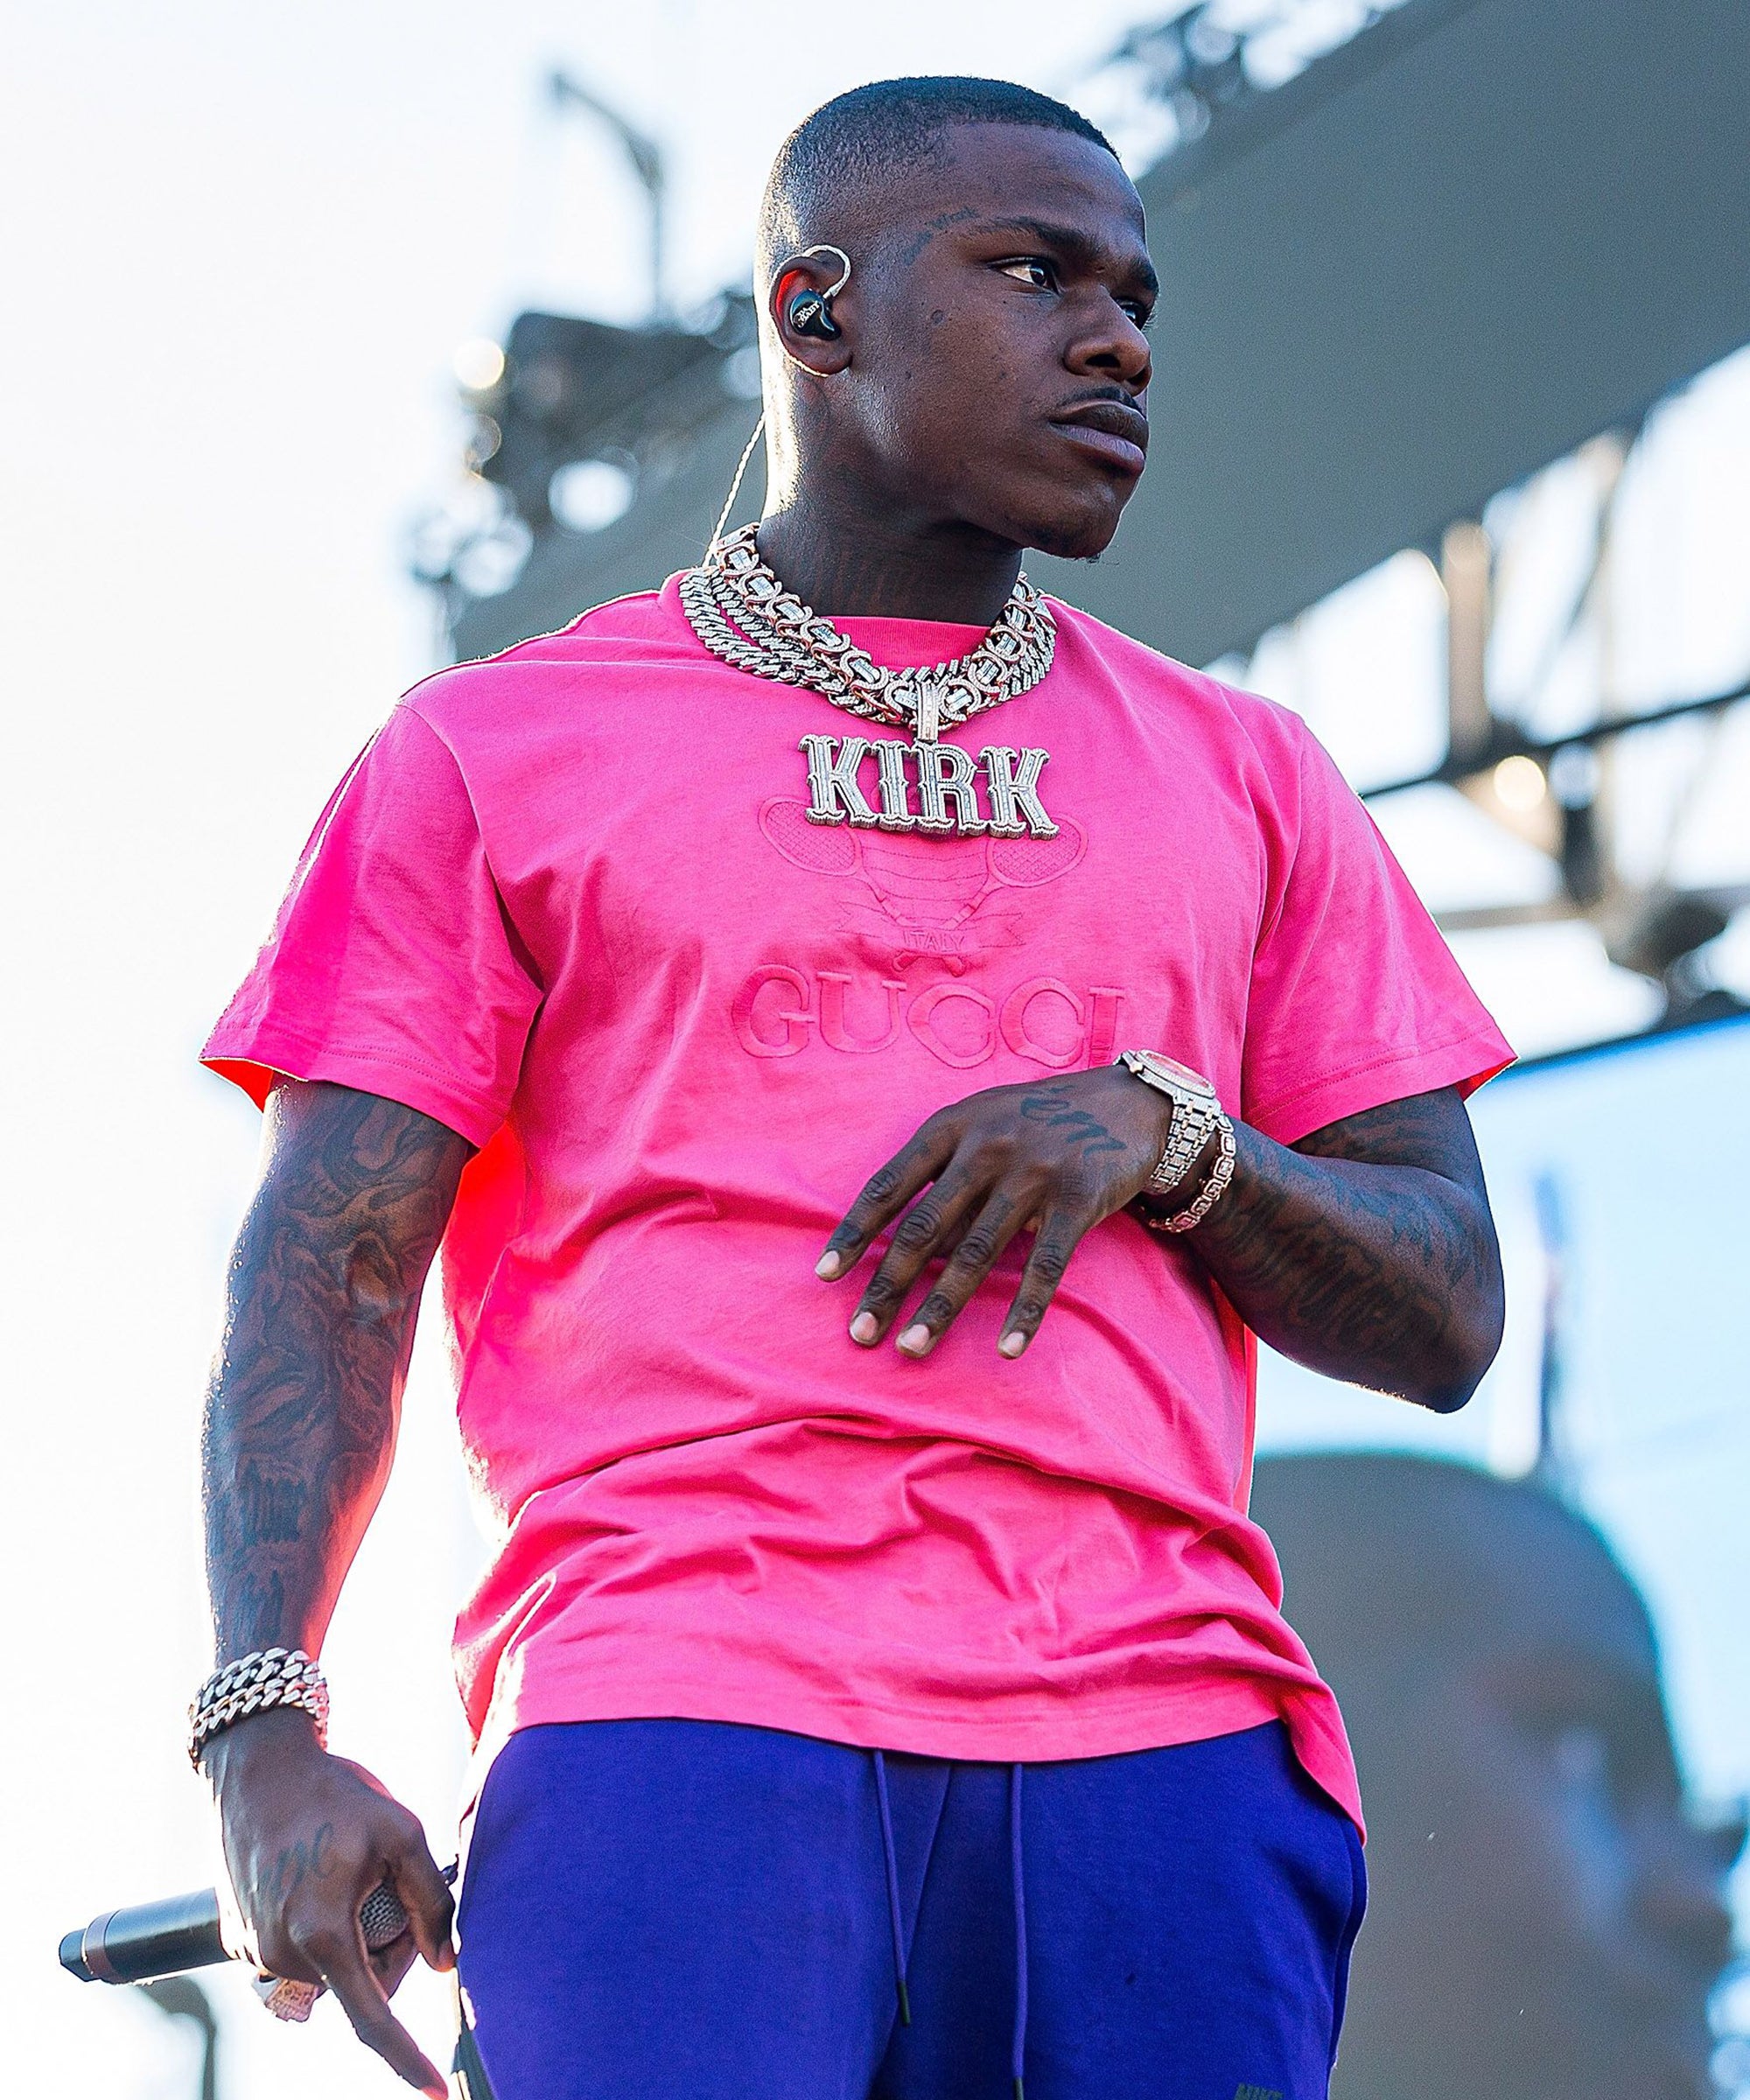 DaBaby's BET Hip Hop Awards Outfit Sparked A Wide Range Of Twitter